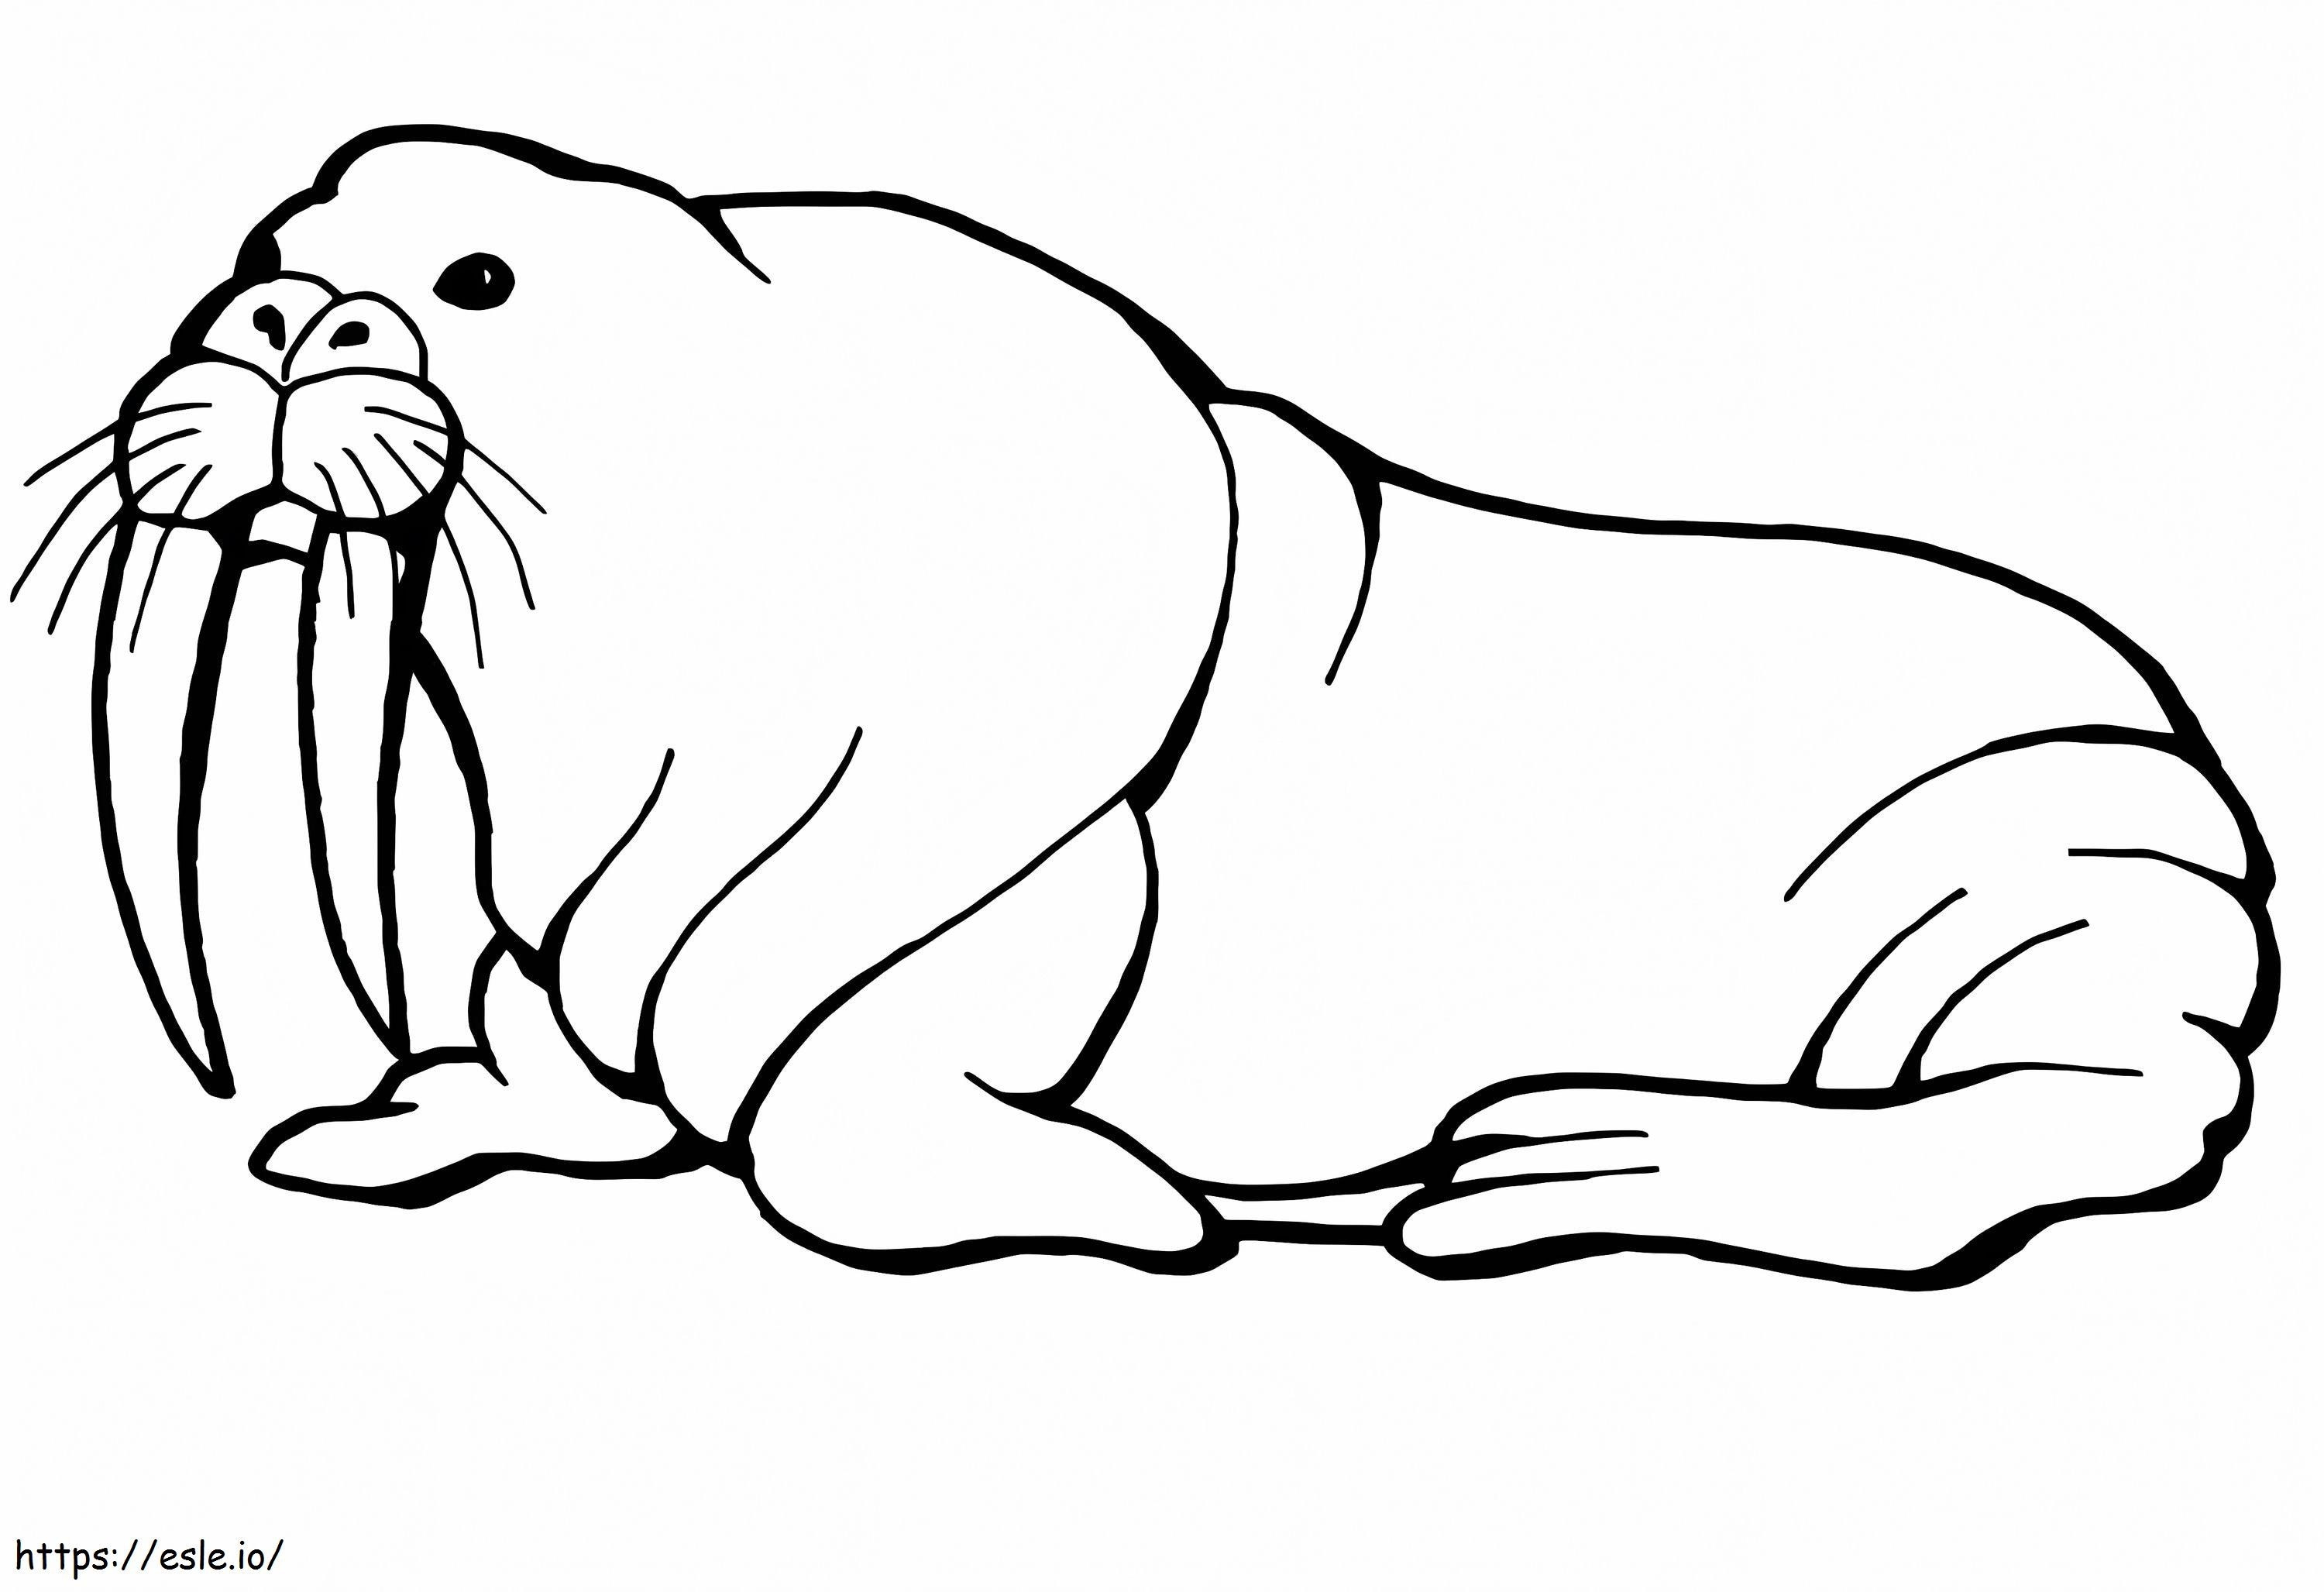 Normal Walrus coloring page